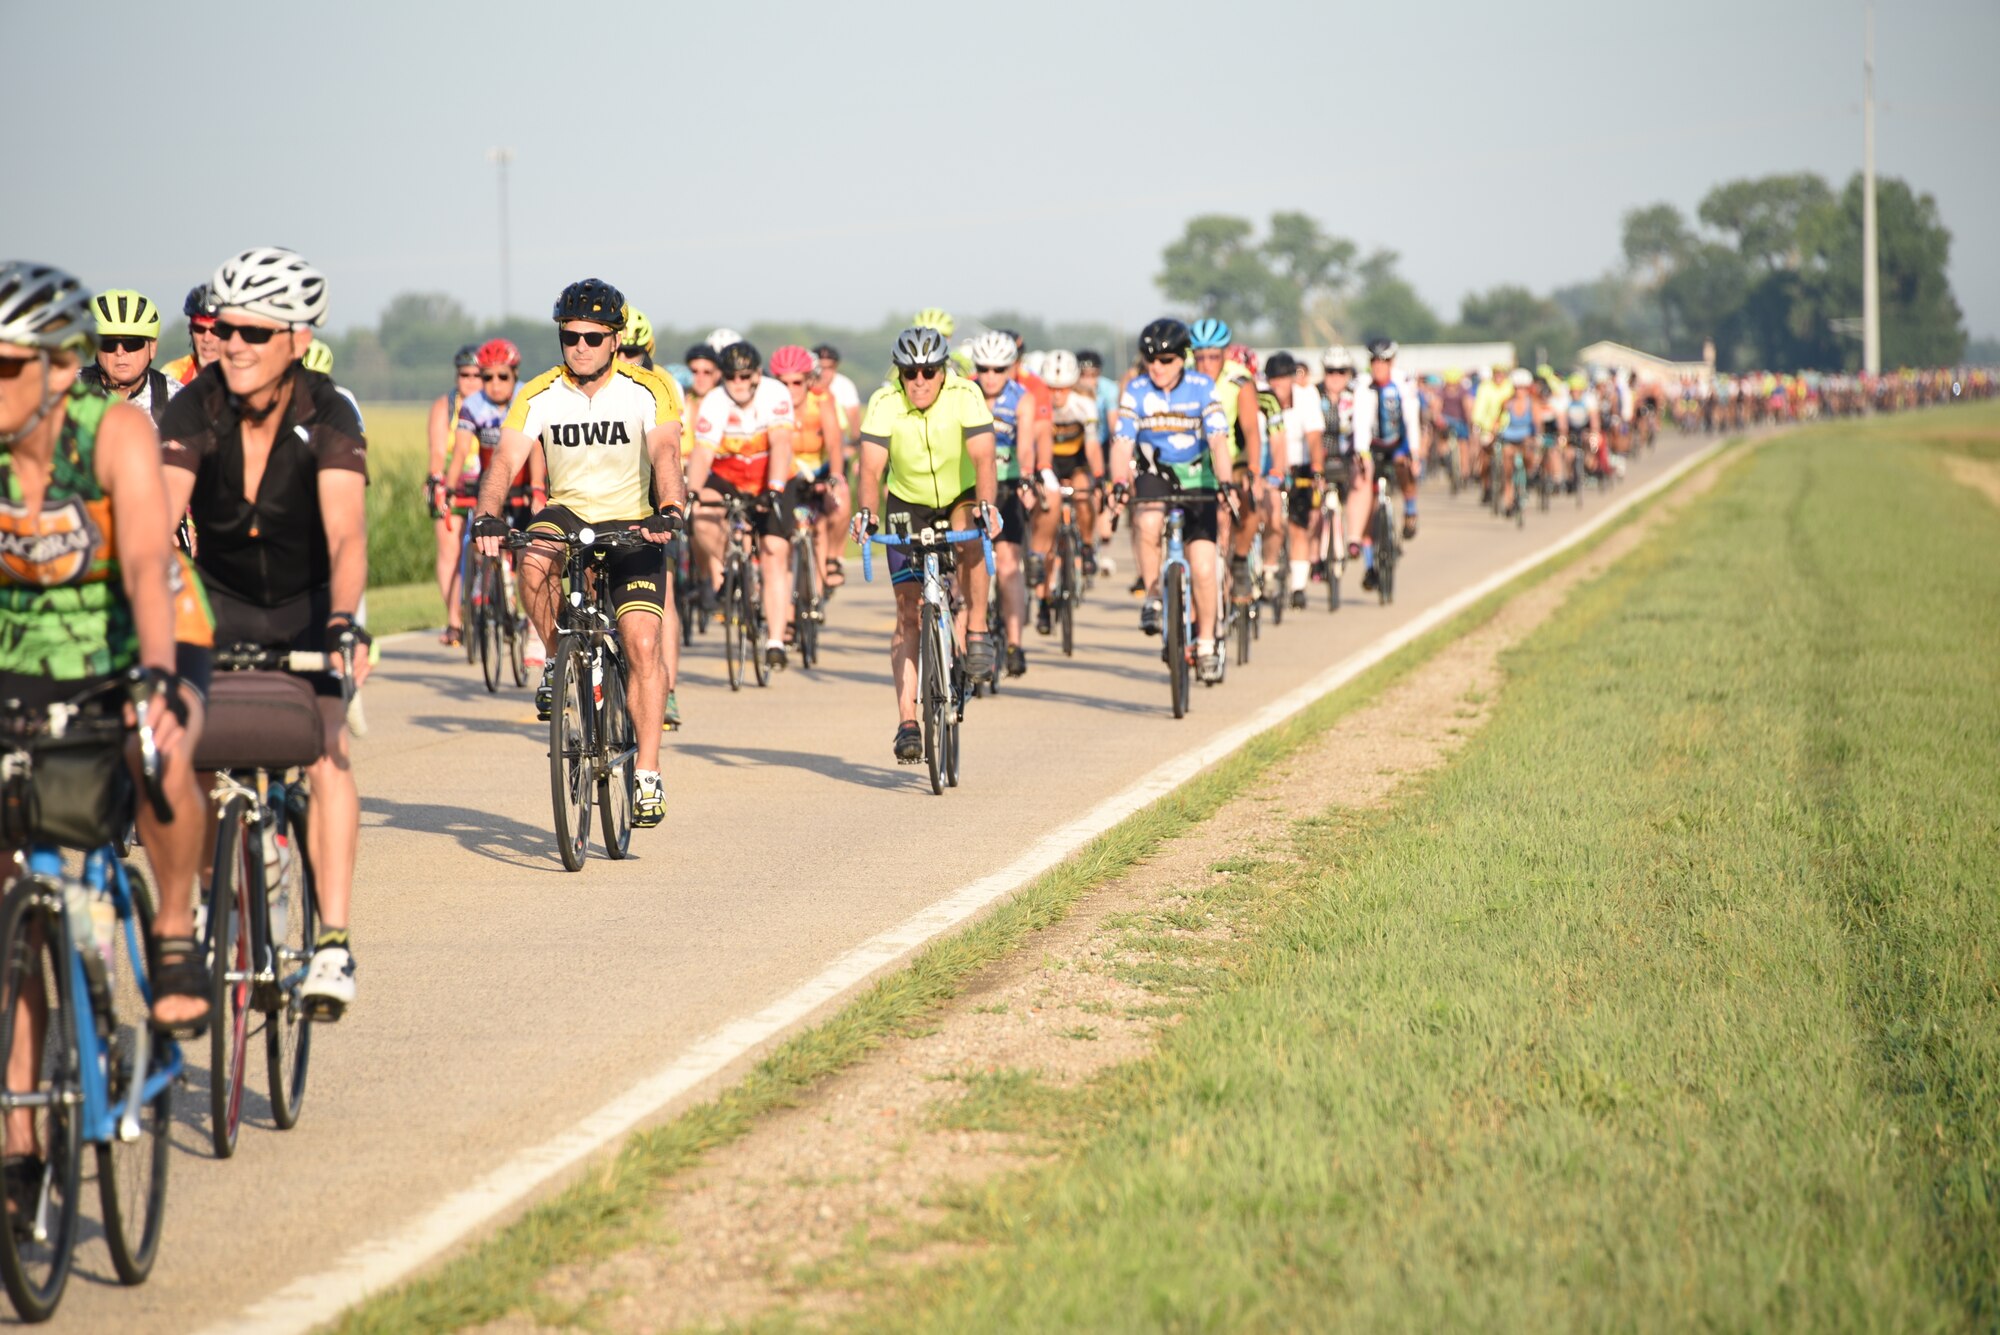 RAGBRAI riders ride bicycles down a road